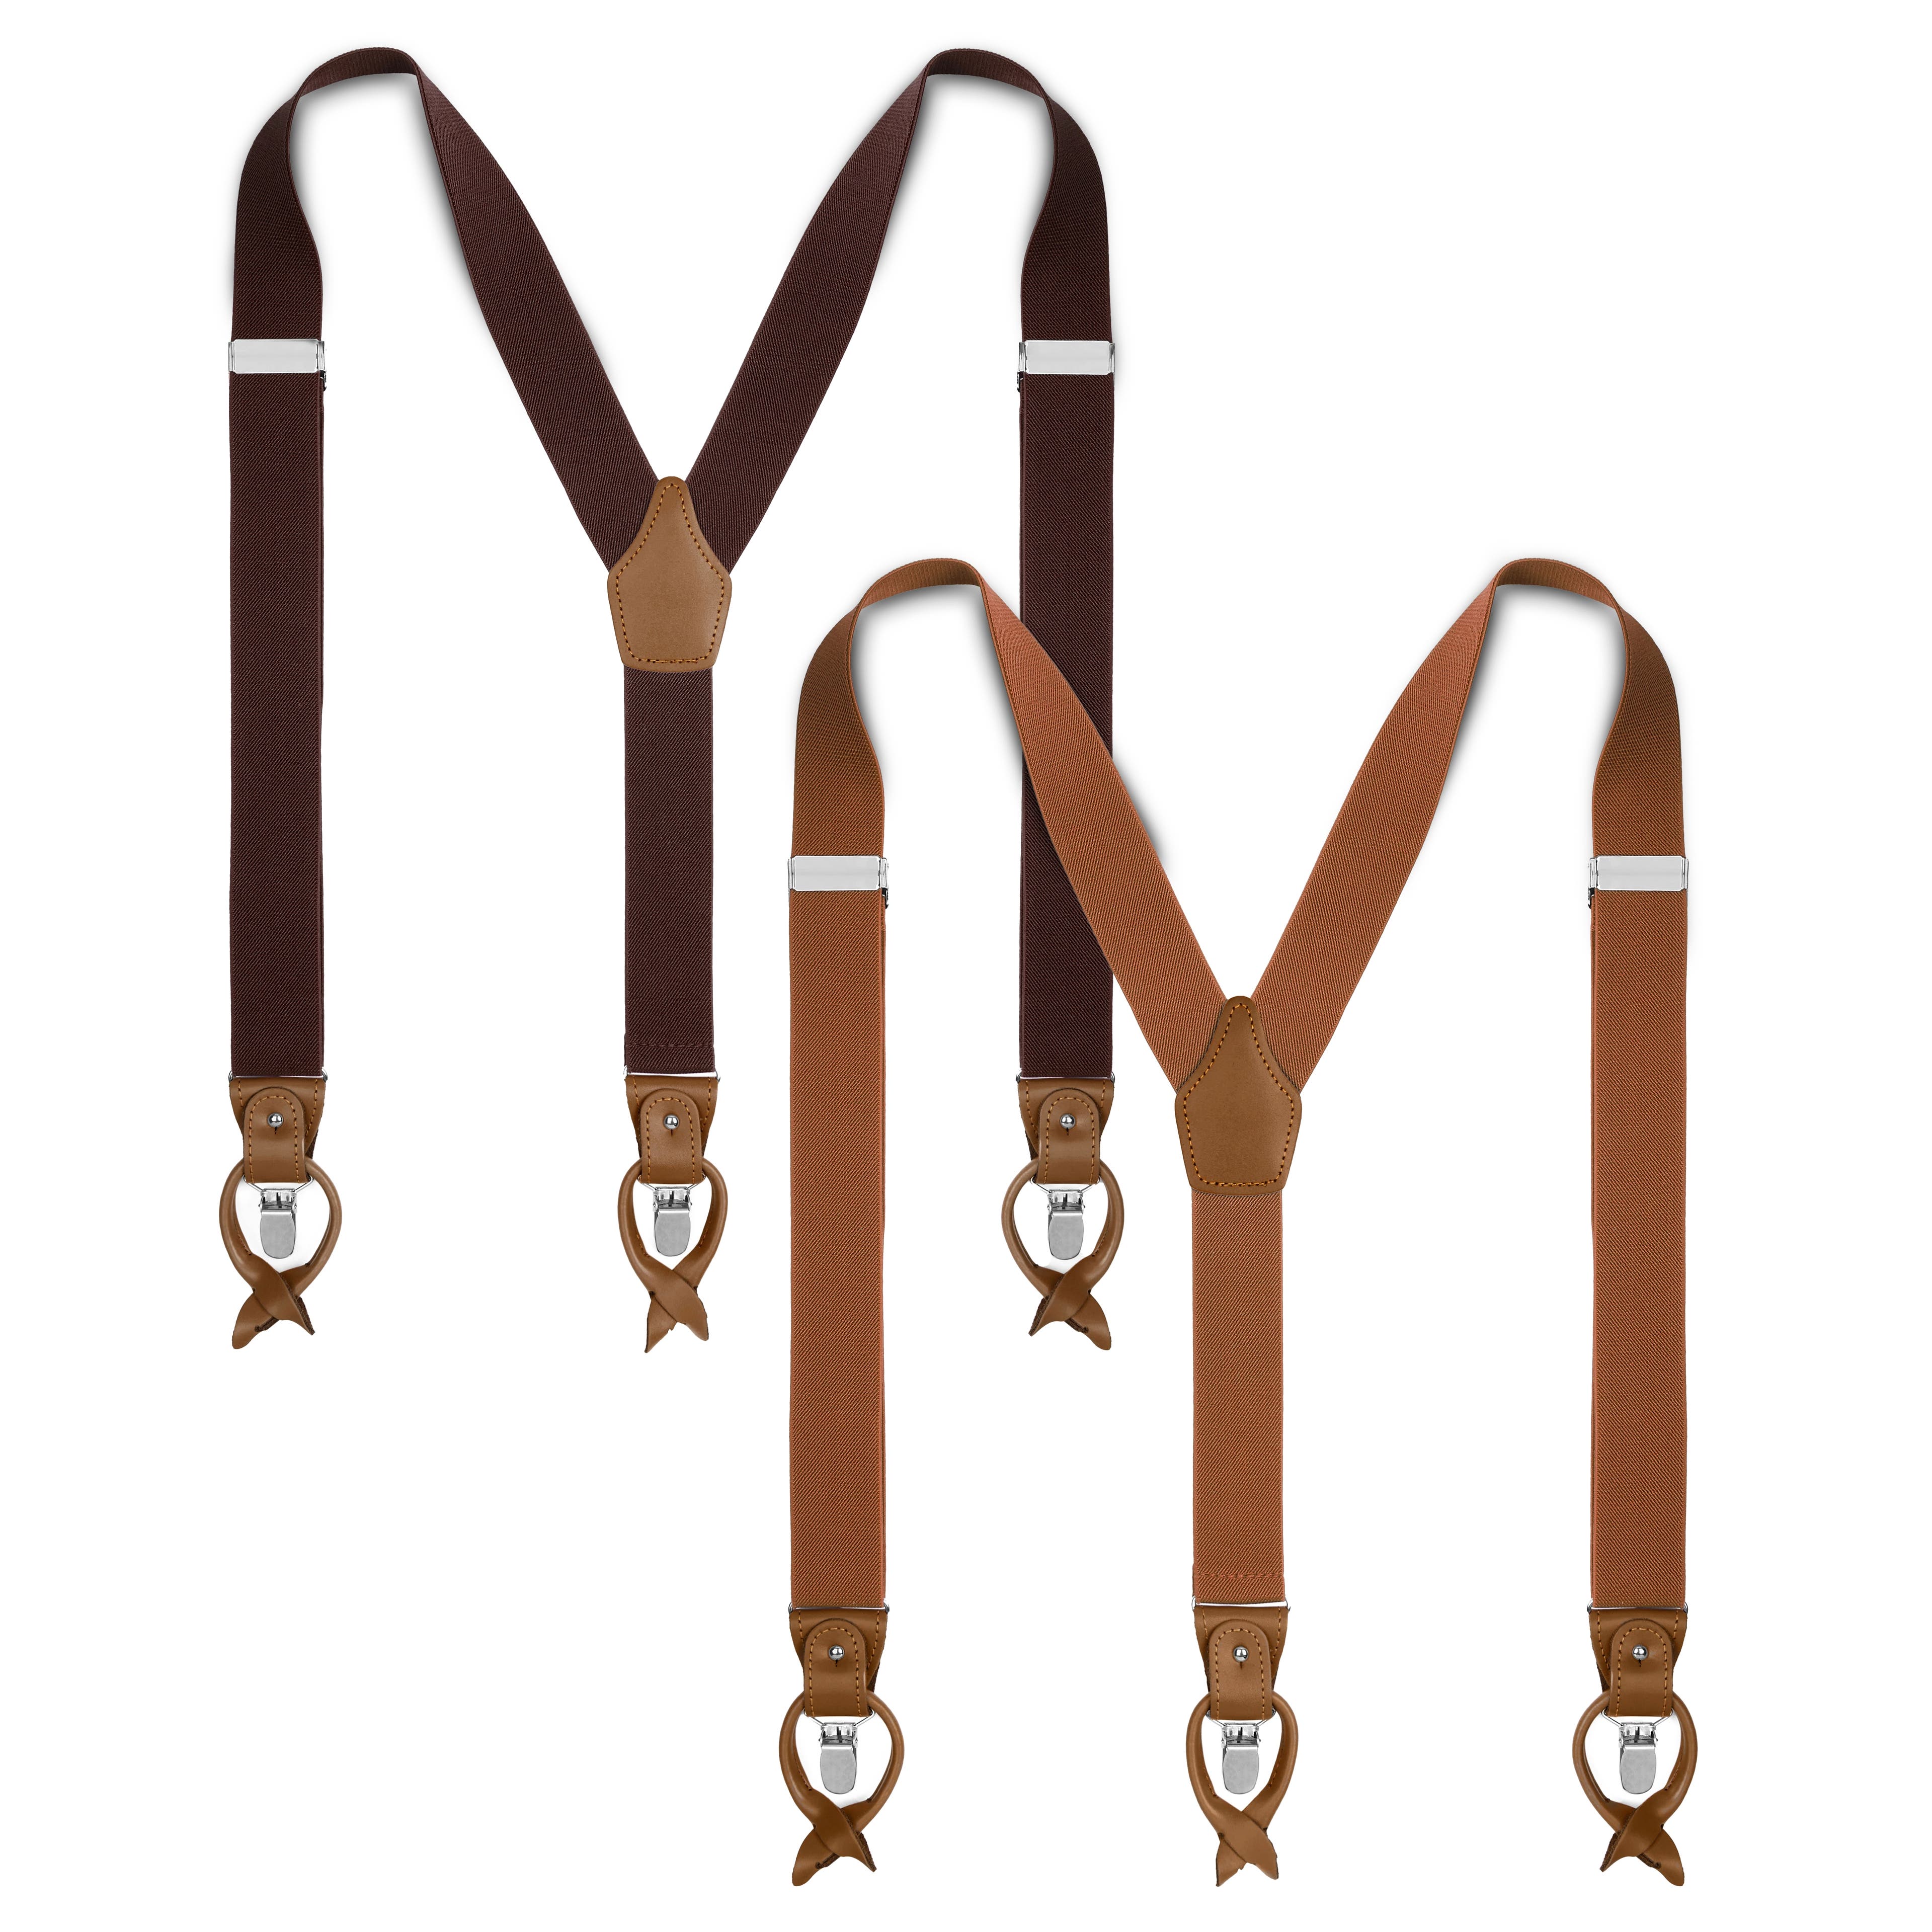 Wide Dark and Light Brown Convertible Braces Set